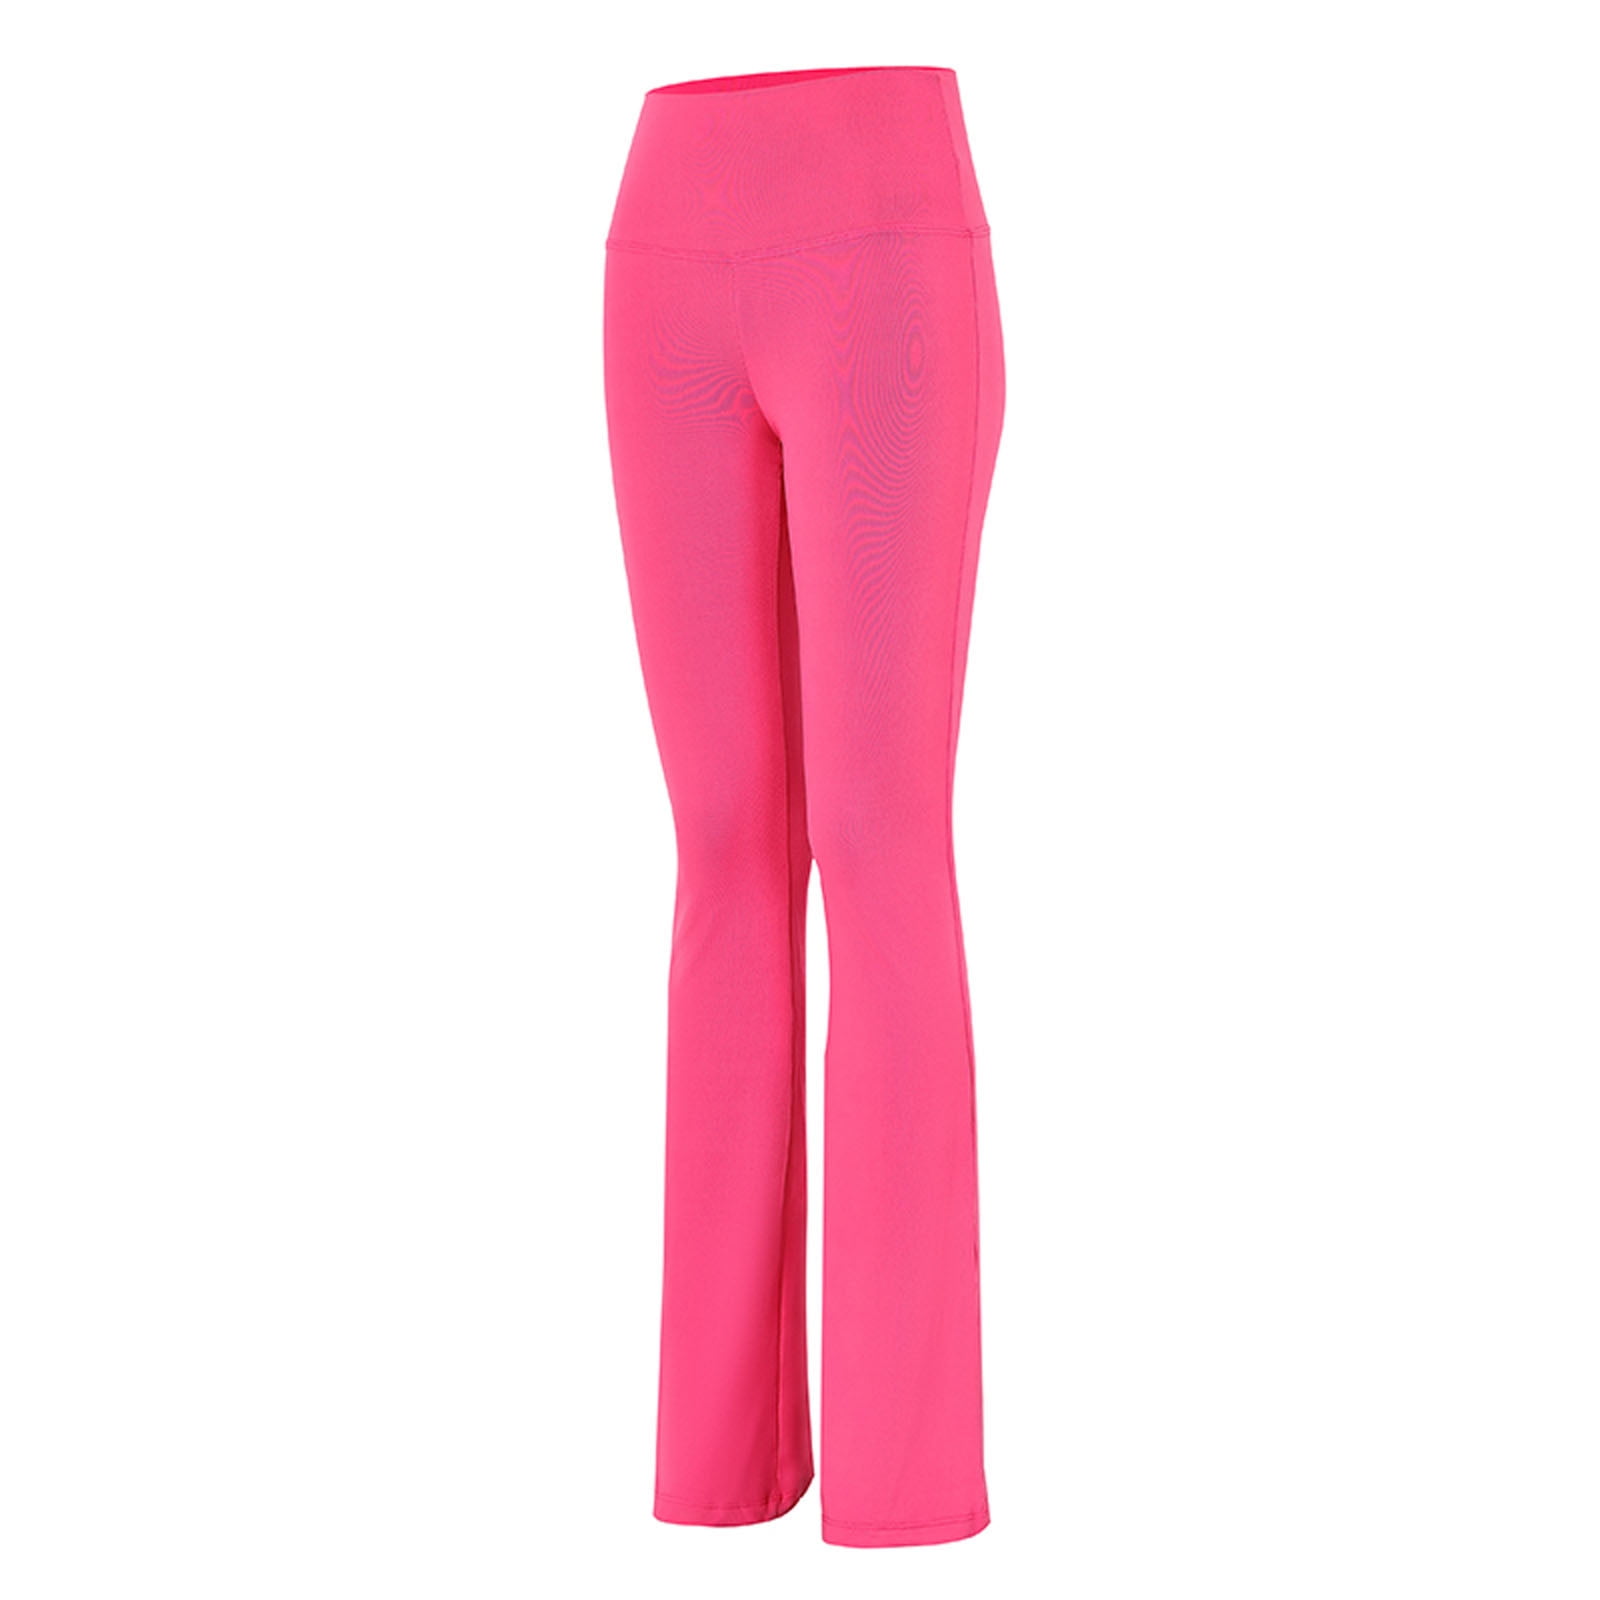 Ernkv Women's Sports Yoga Leggings Flare Pants Clearance Solid Clothing  Summer High Elastic Waist Comfy Trousers Stretch Fit Fashion Retro Hot Pink  S